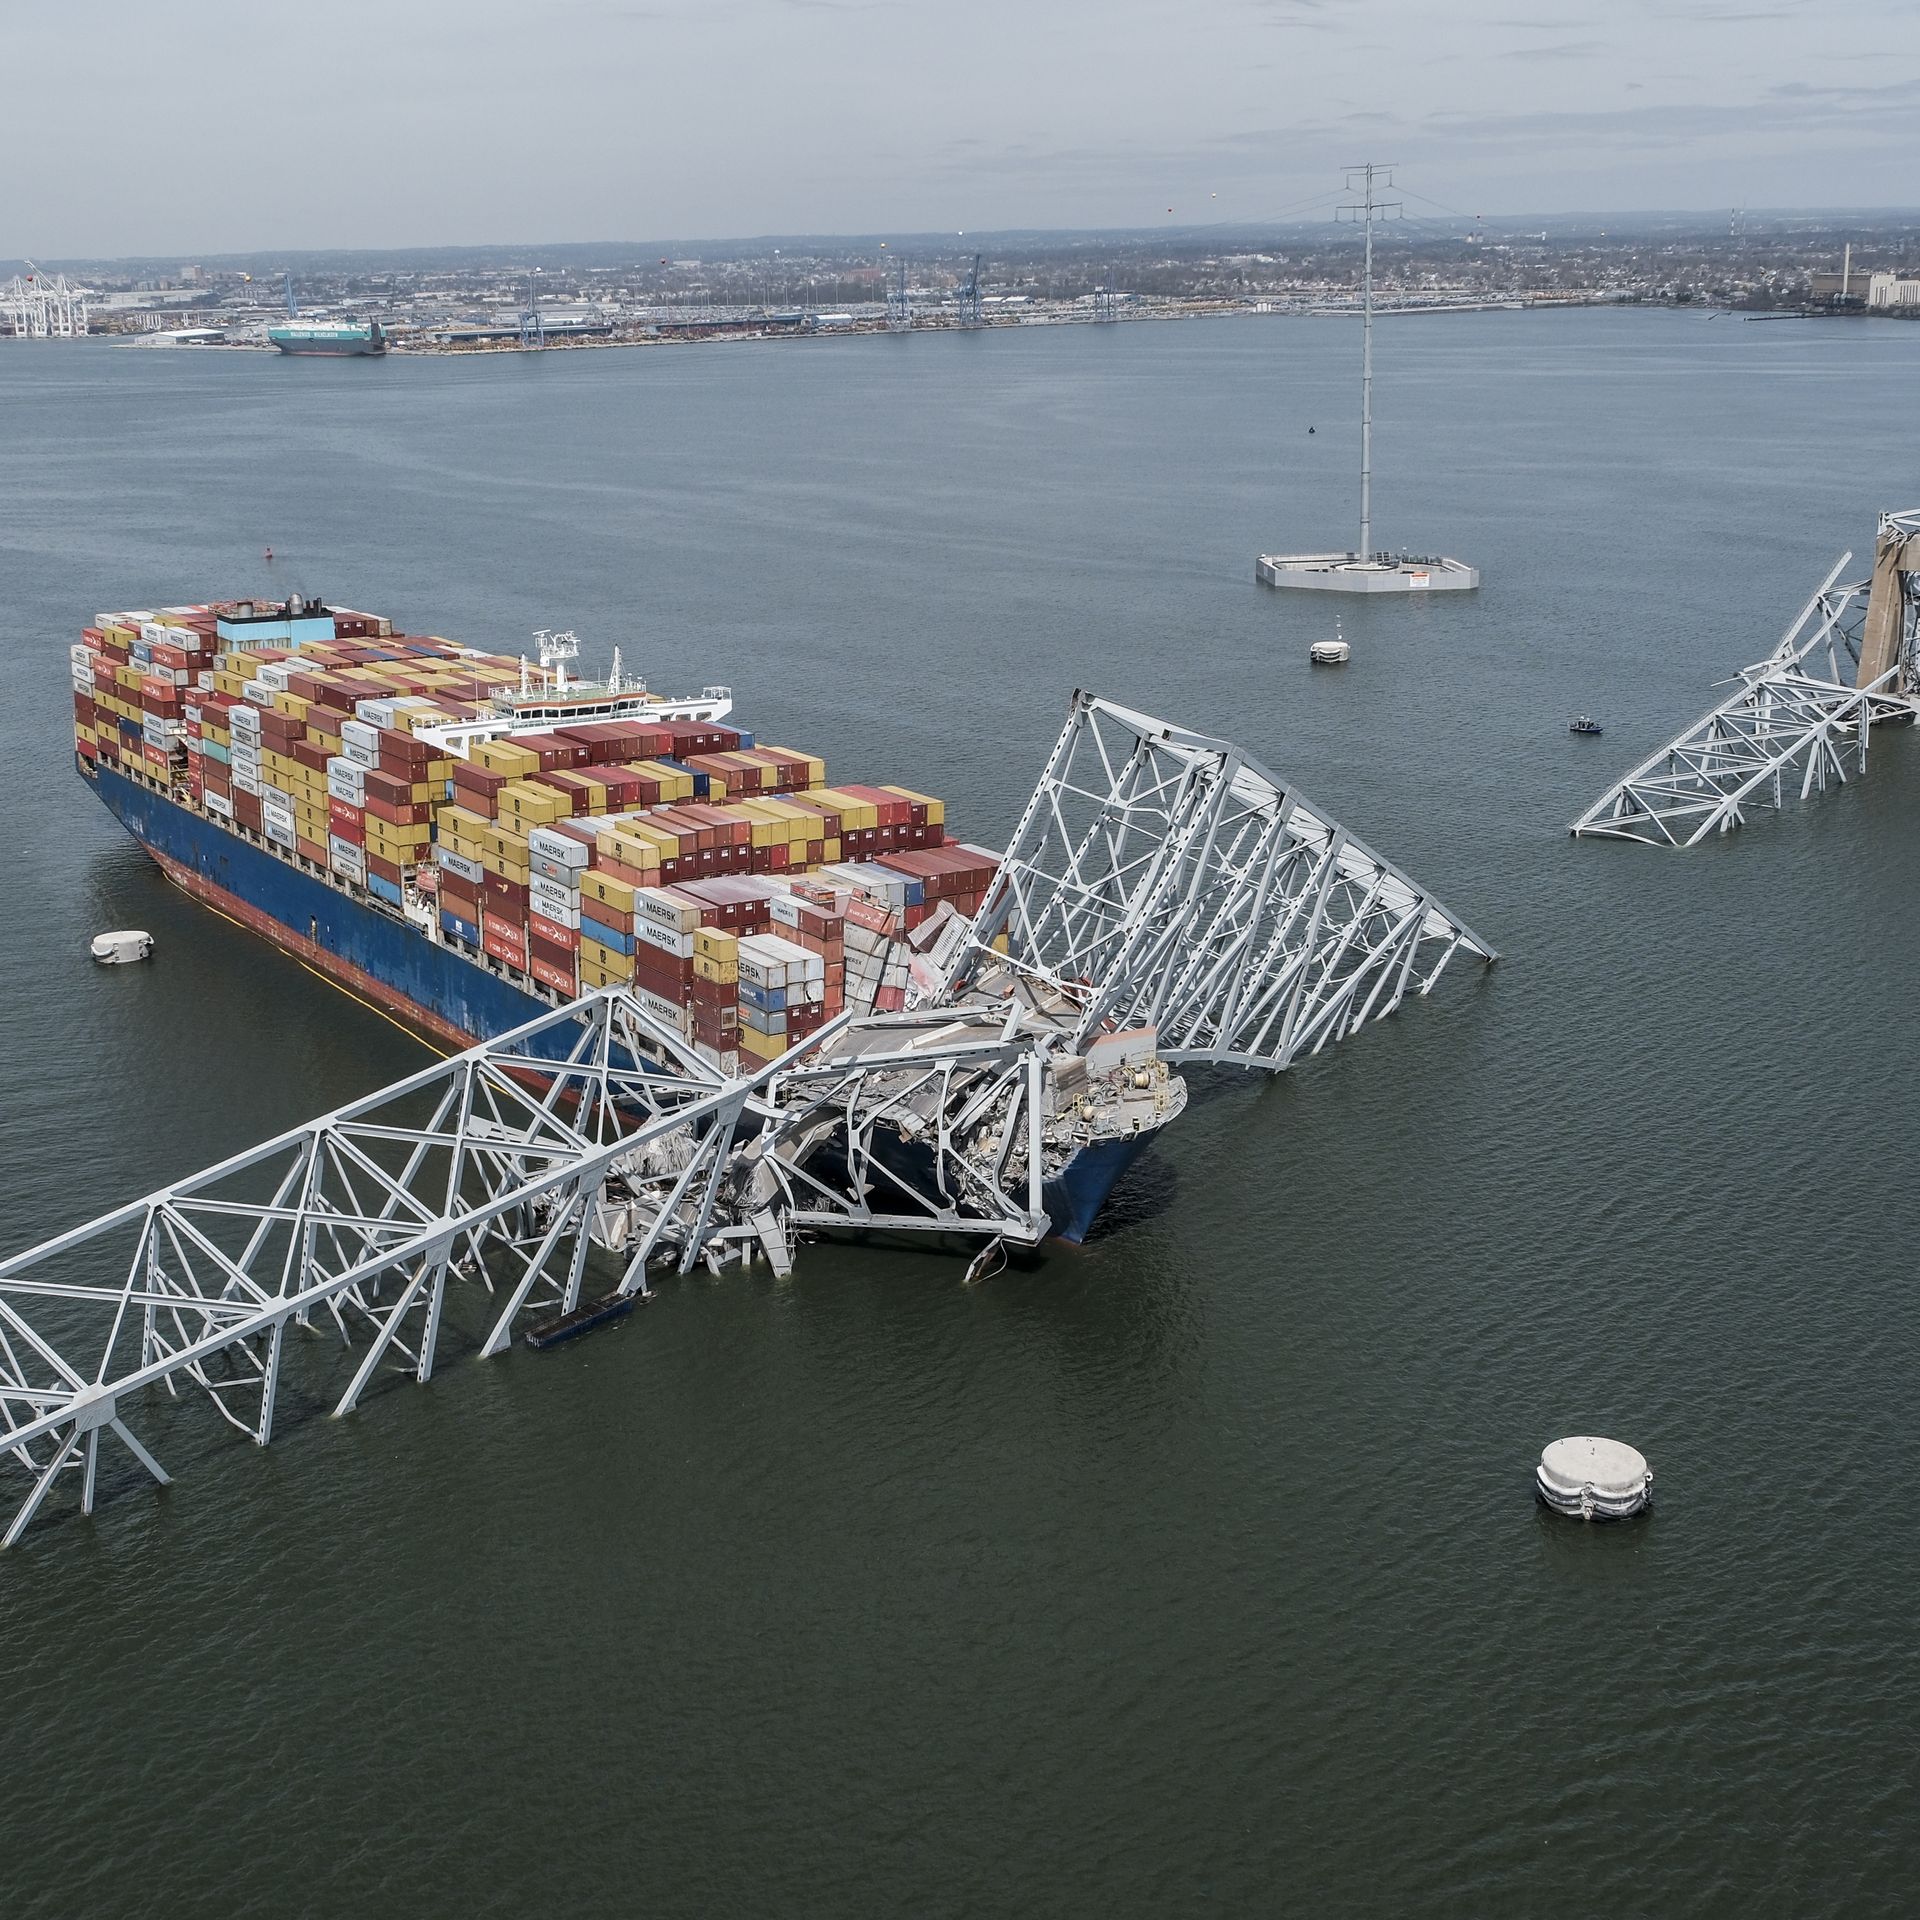 How Baltimore's Key Bridge collapse will affect supply chains and